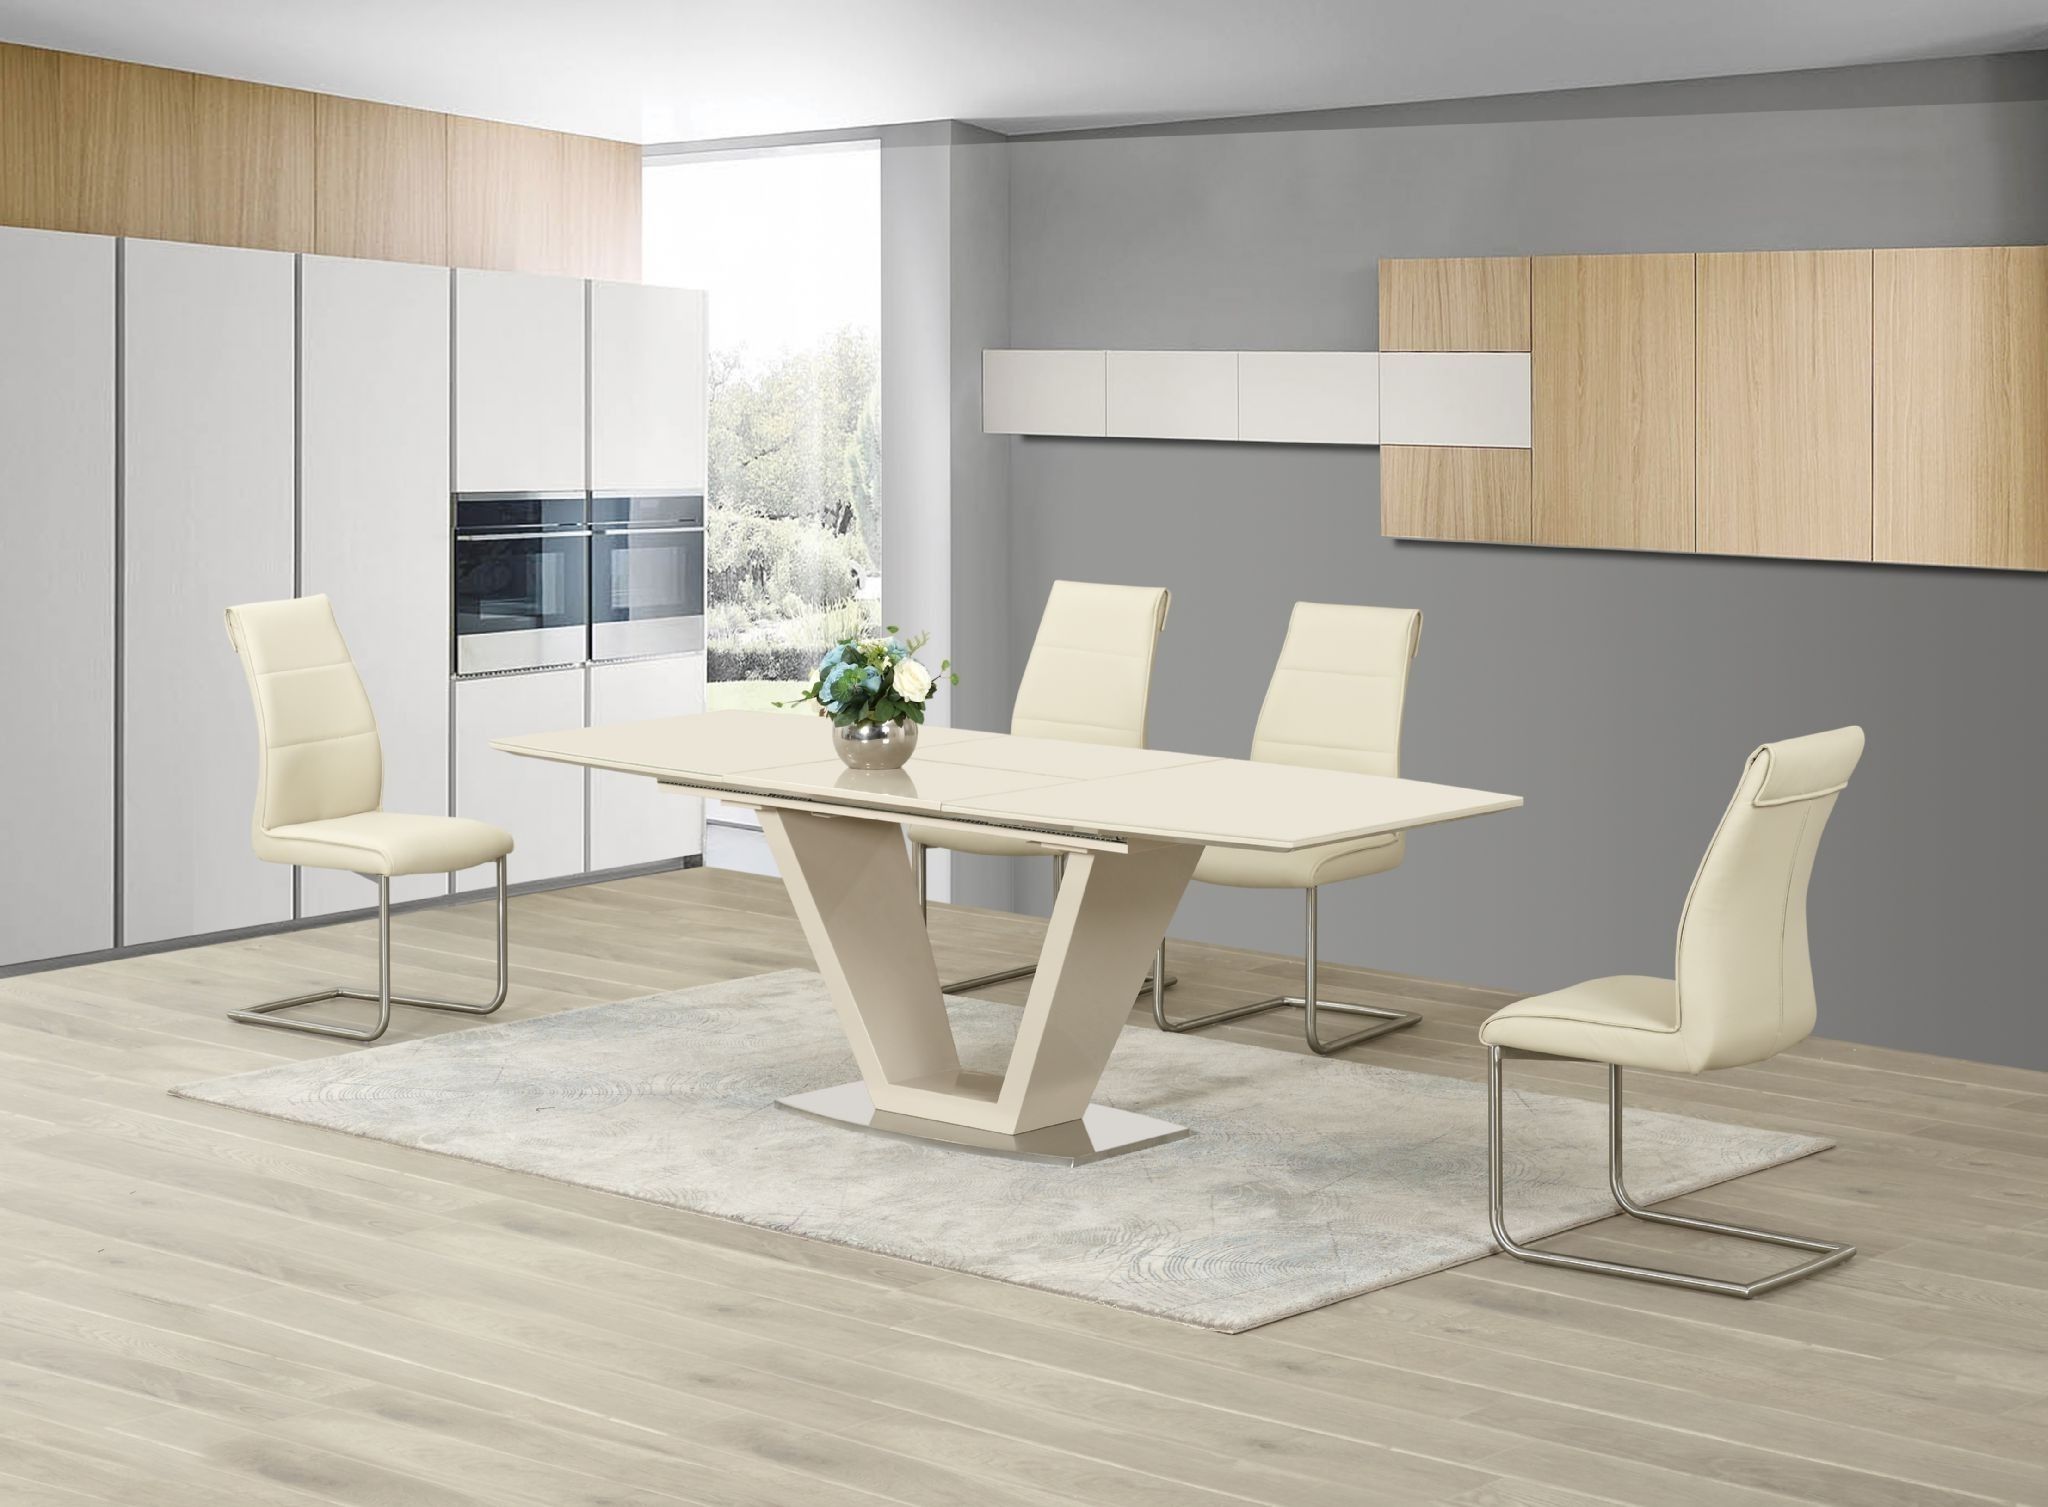 Most Up To Date Floris Cream Gloss Extending Dining Table 160 220cm Regarding High Gloss Dining Room Furniture (View 11 of 25)